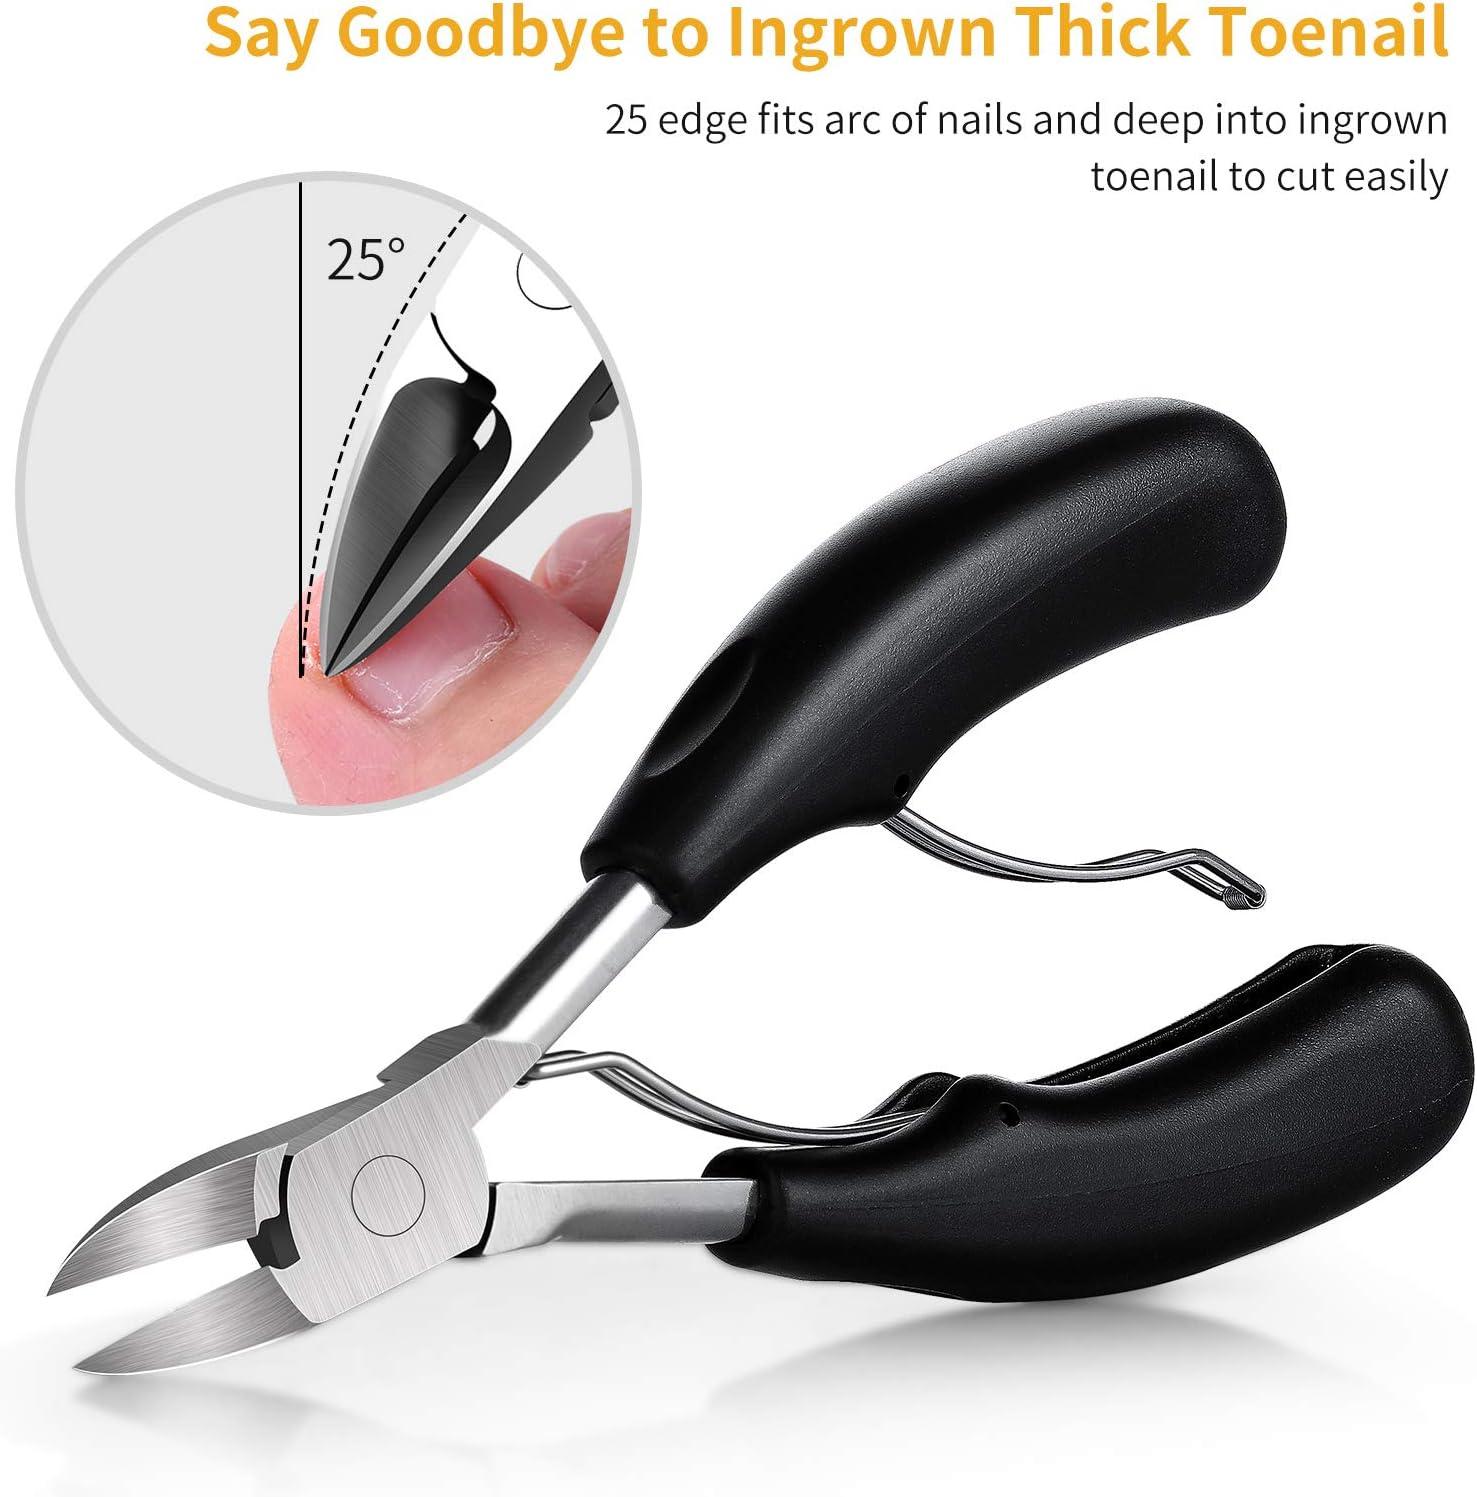 Podiatrist Toe Nail Clipper Thick & Ingrown Toe Nail Clippers For